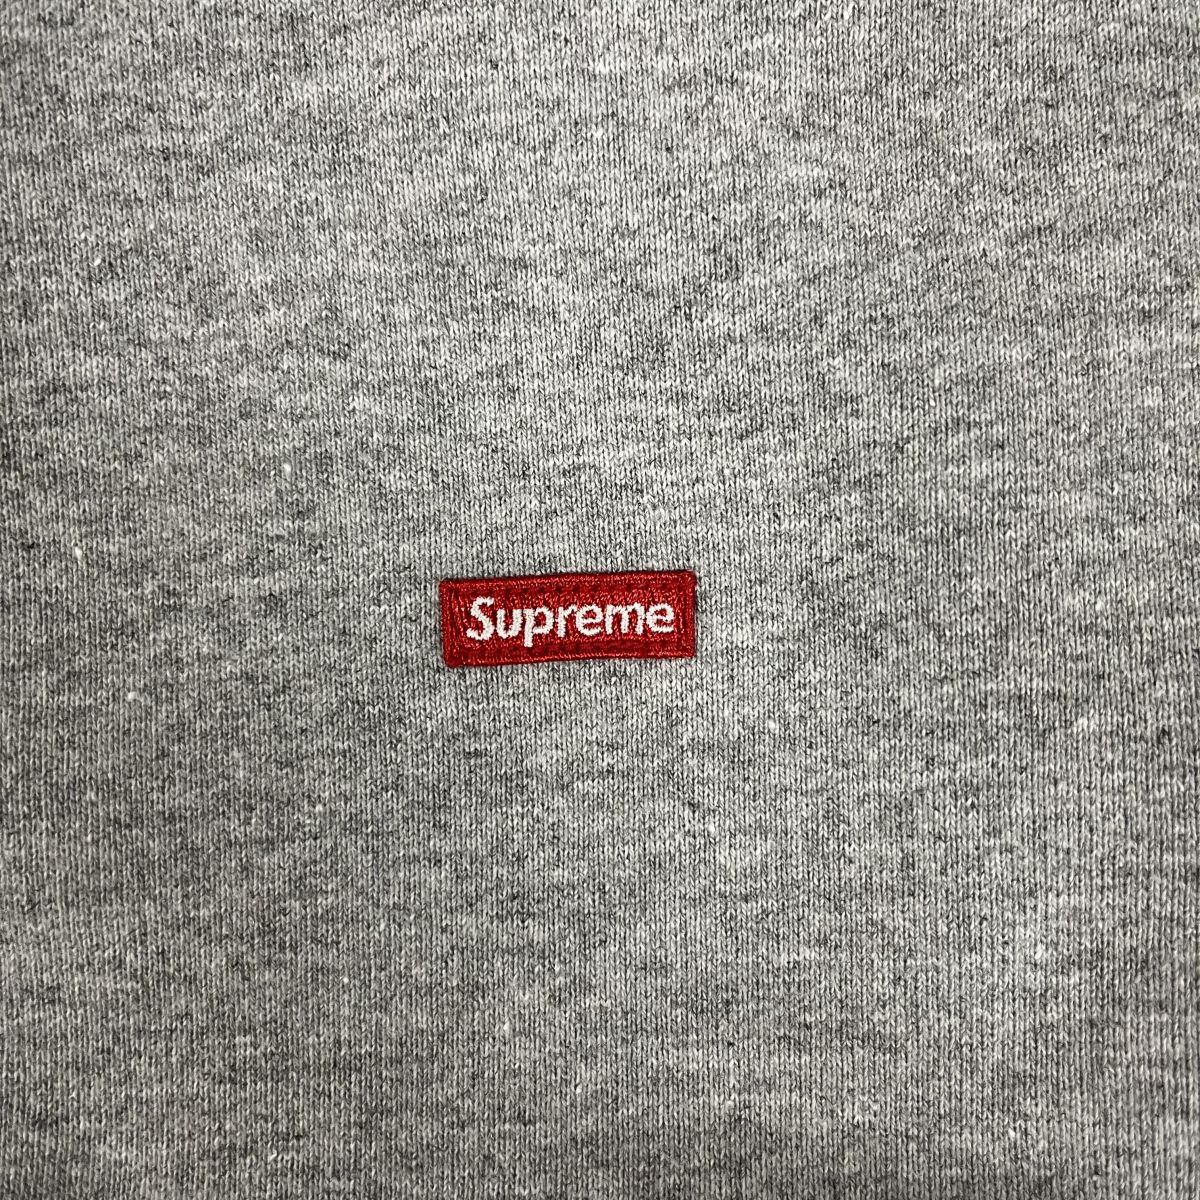 Supreme/シュプリーム【20AW】Small Box Facemask Zip Up Hooded ...